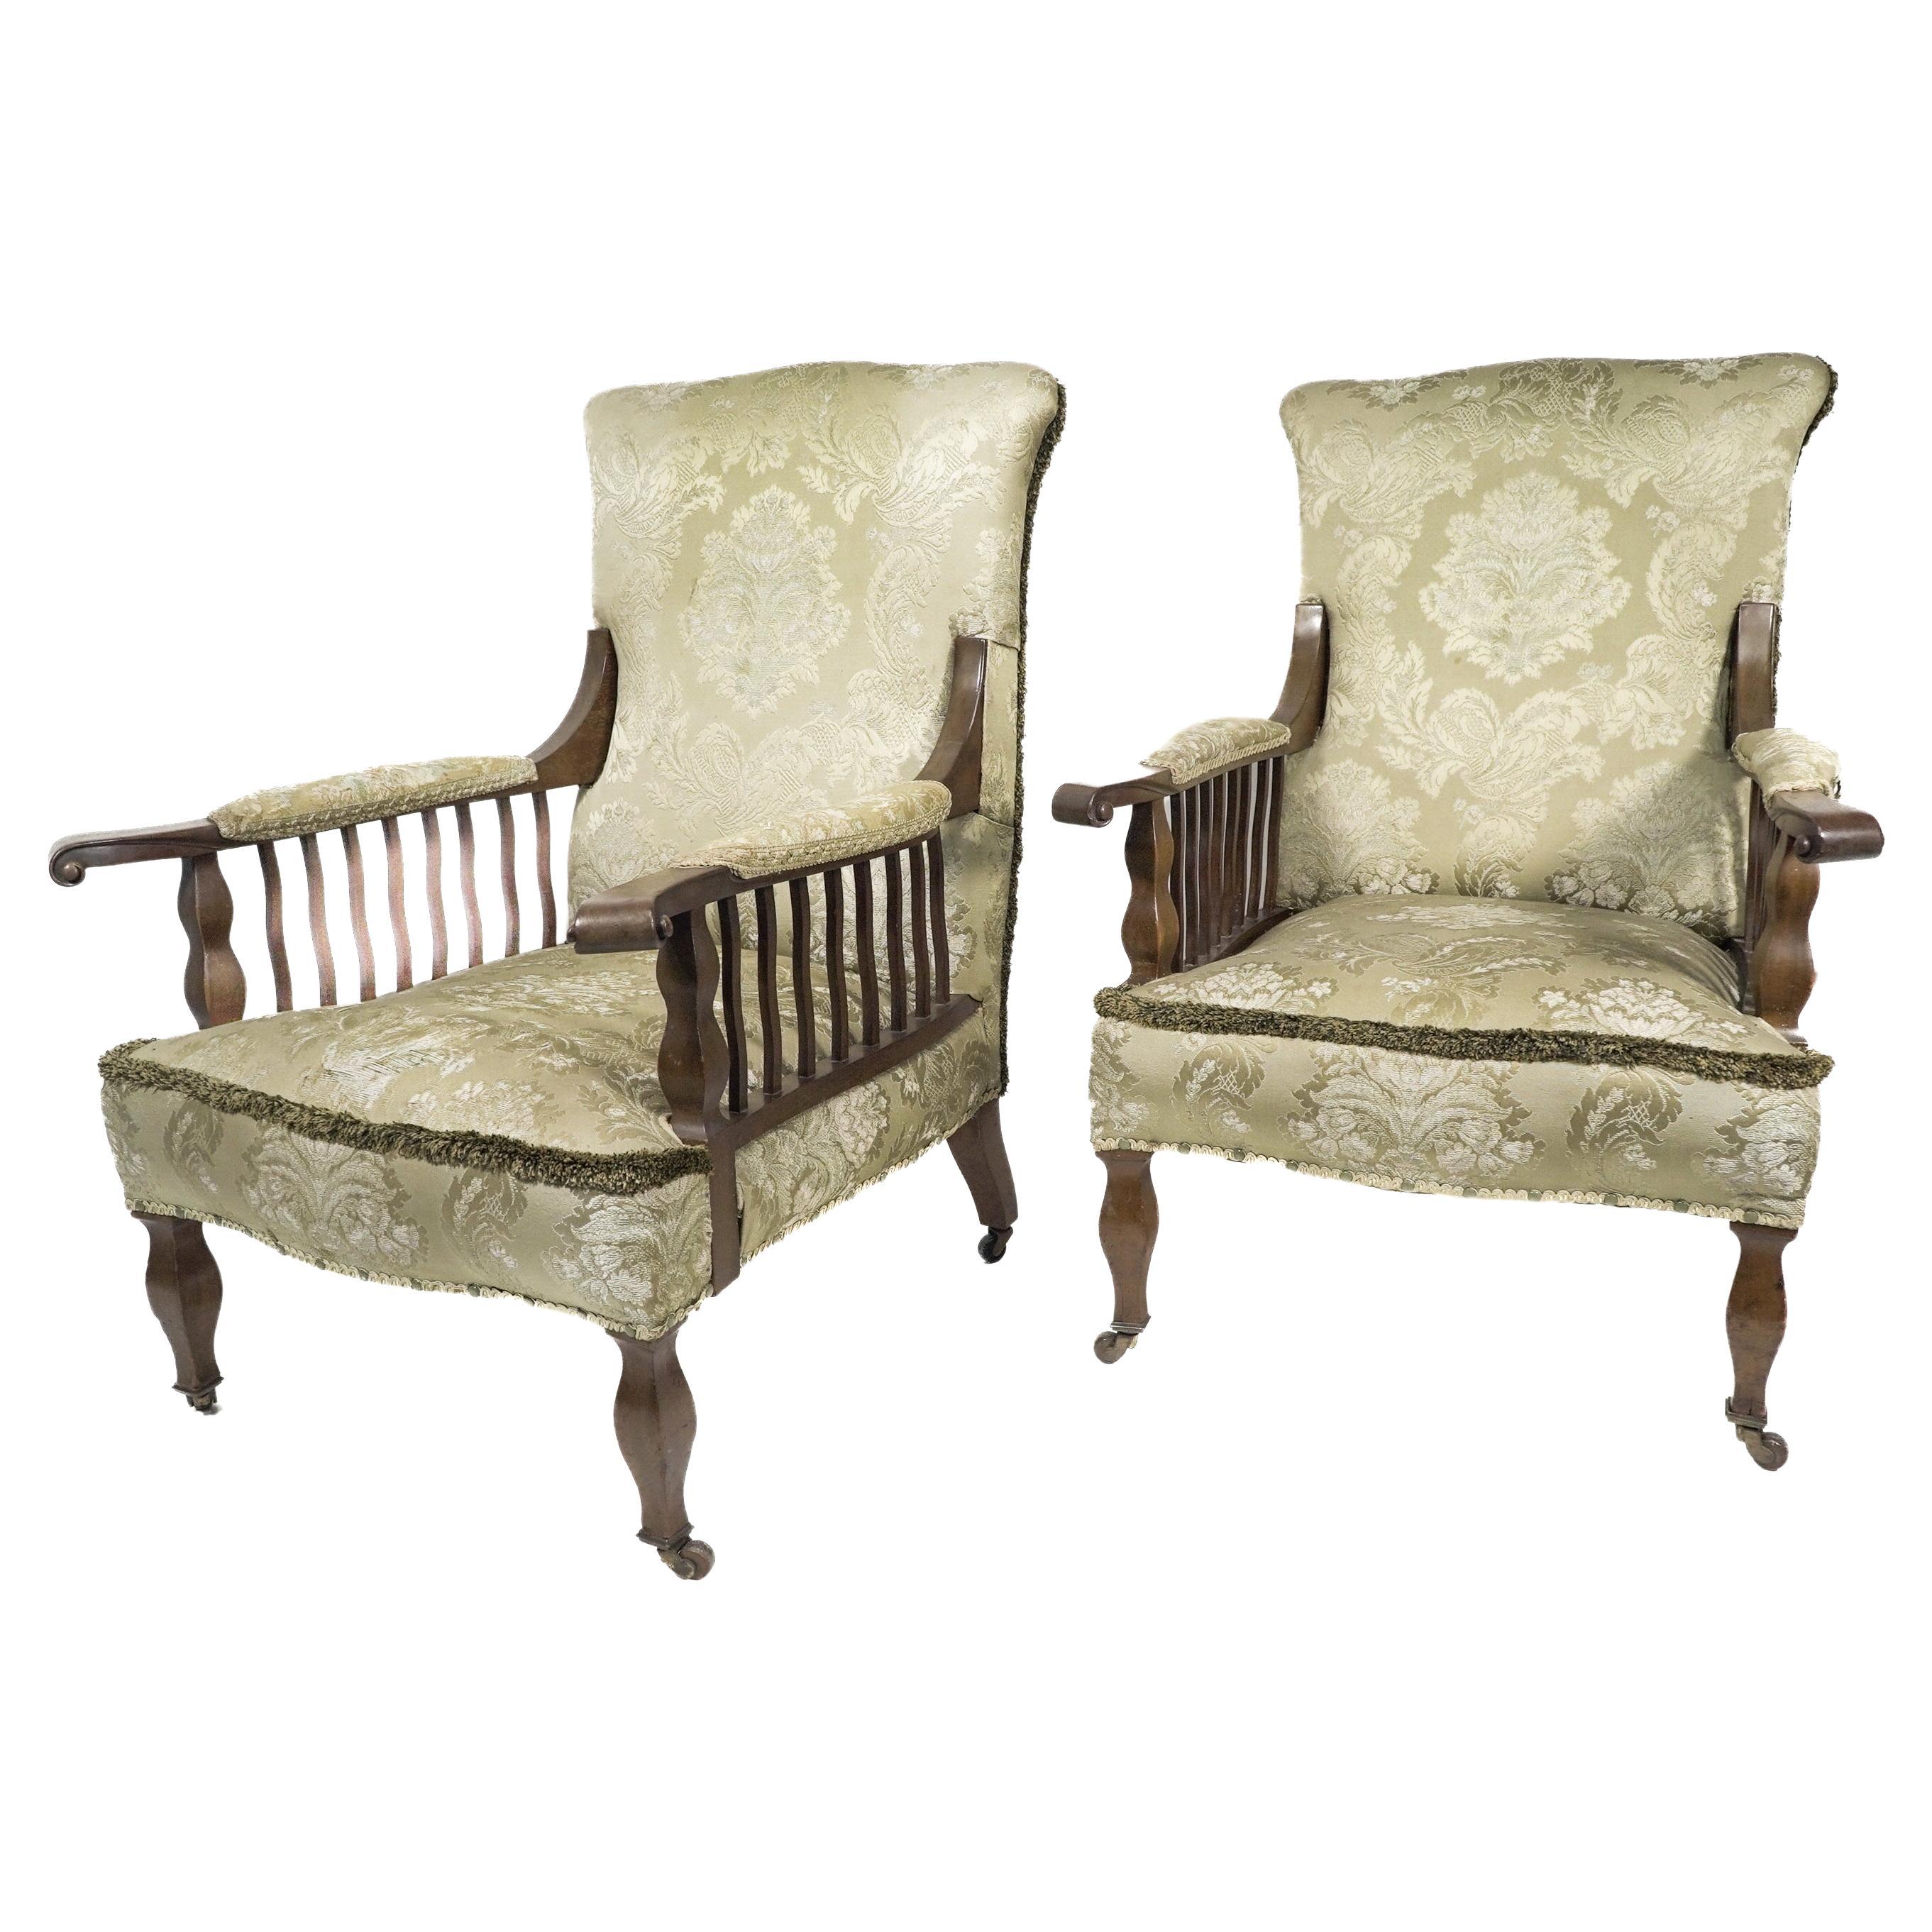 George Jack for Morris and Co. A Pair of Mahogany Saville armchairs